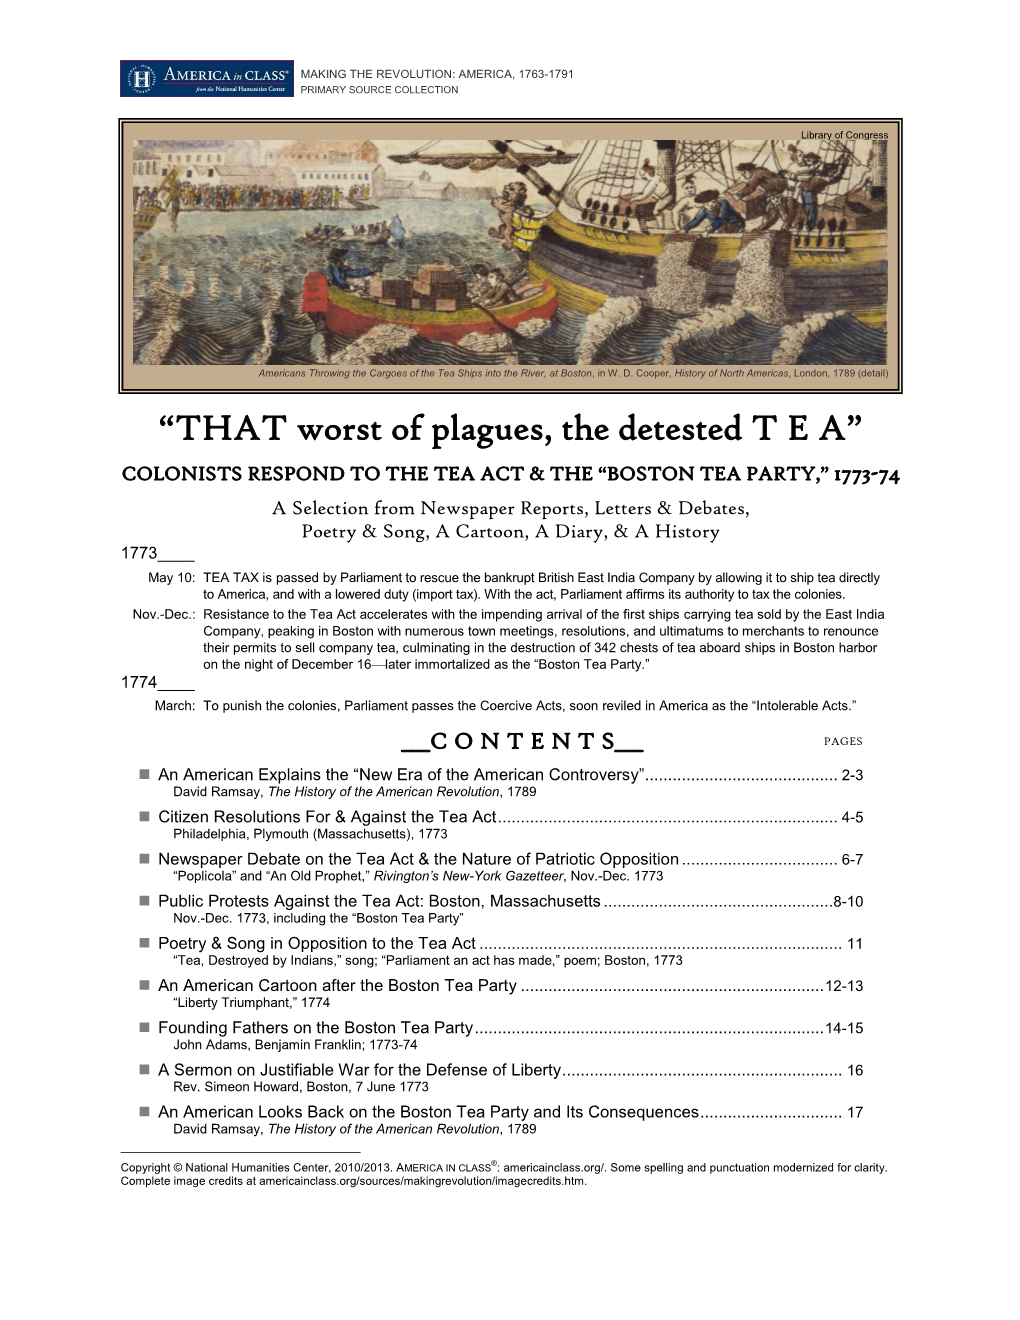 Colonists Respond to the Tea Act & the Boston Tea Party, 1773-1774